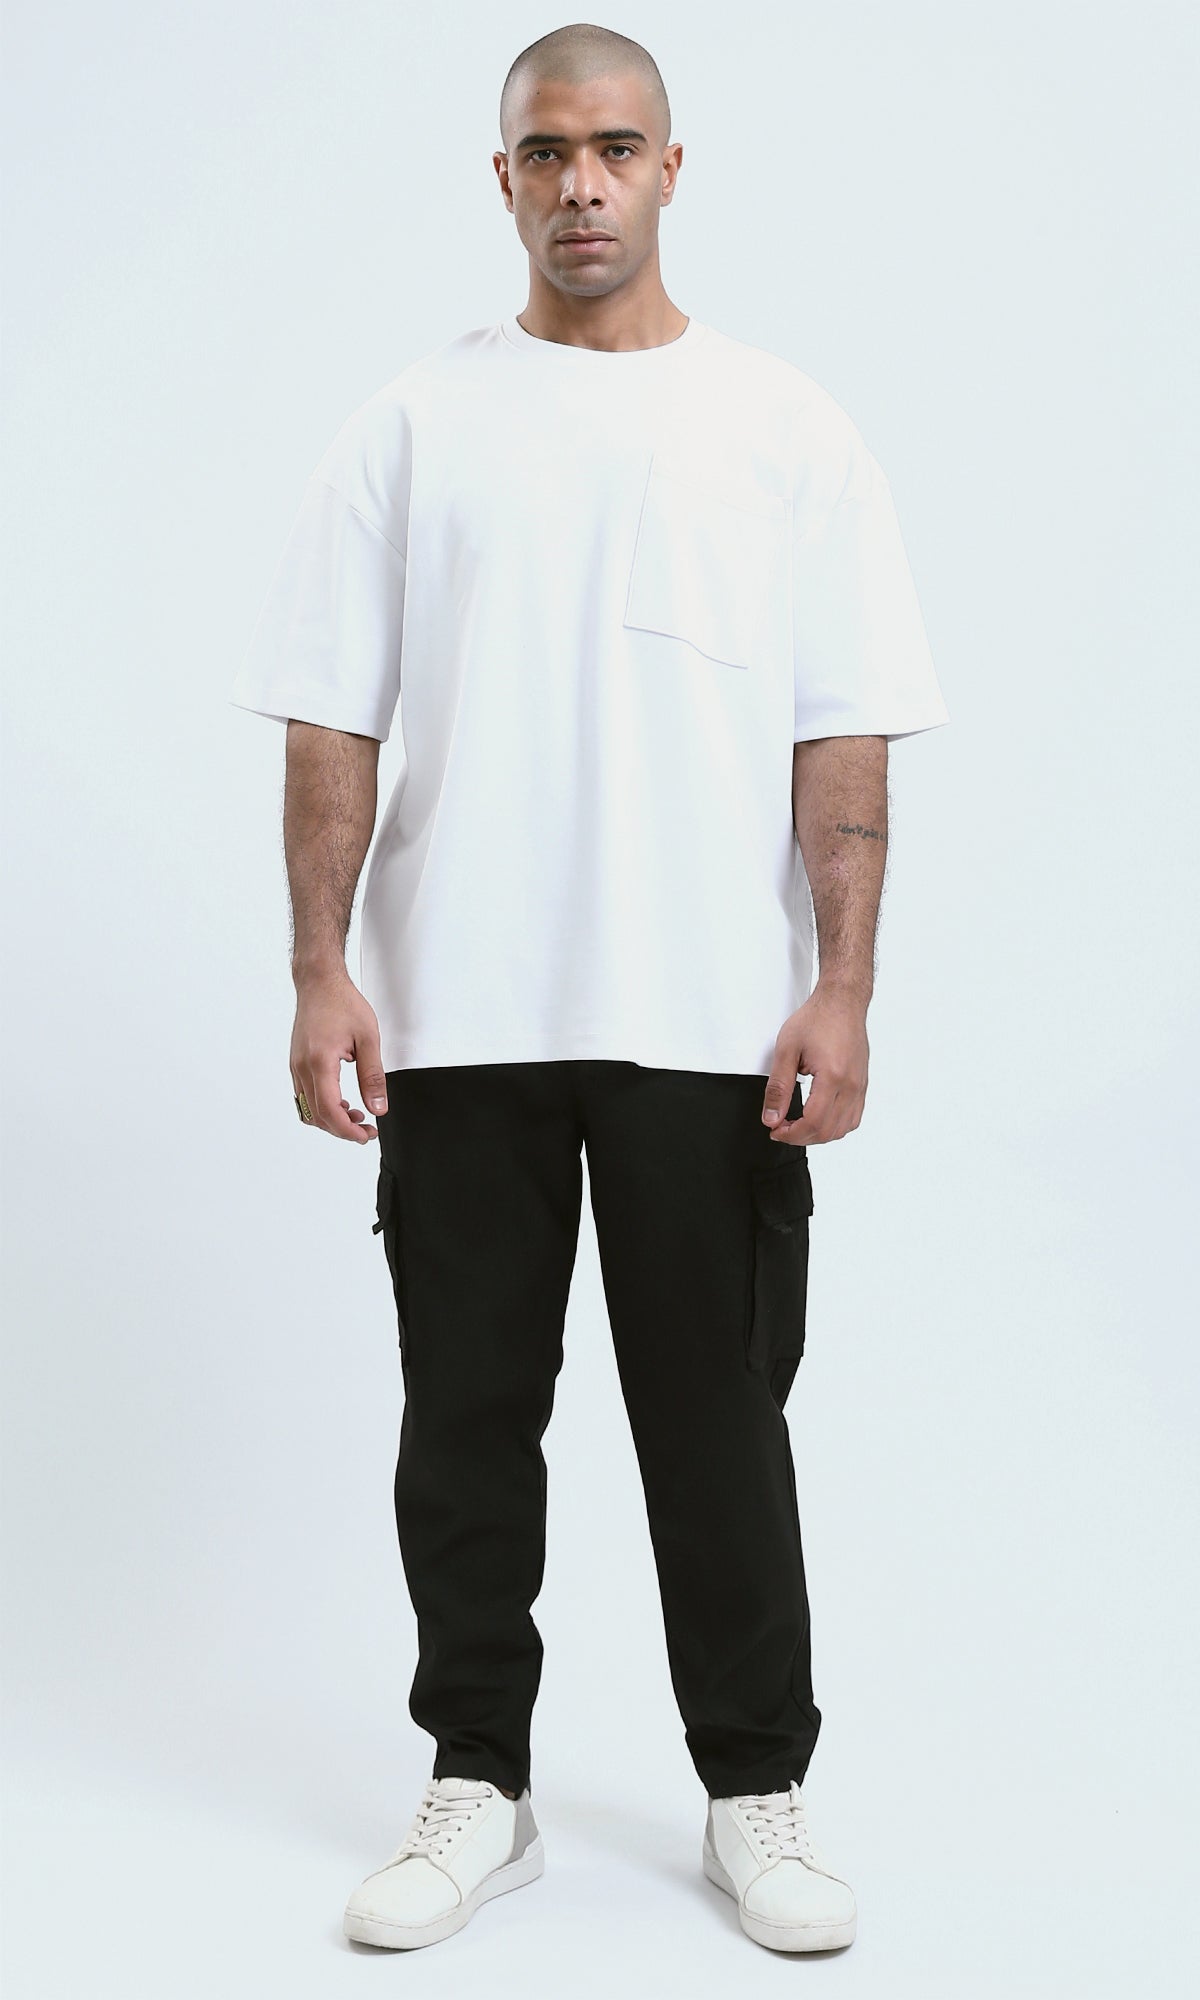 O190723 Elbow Sleeves White Tee With Side Pocket